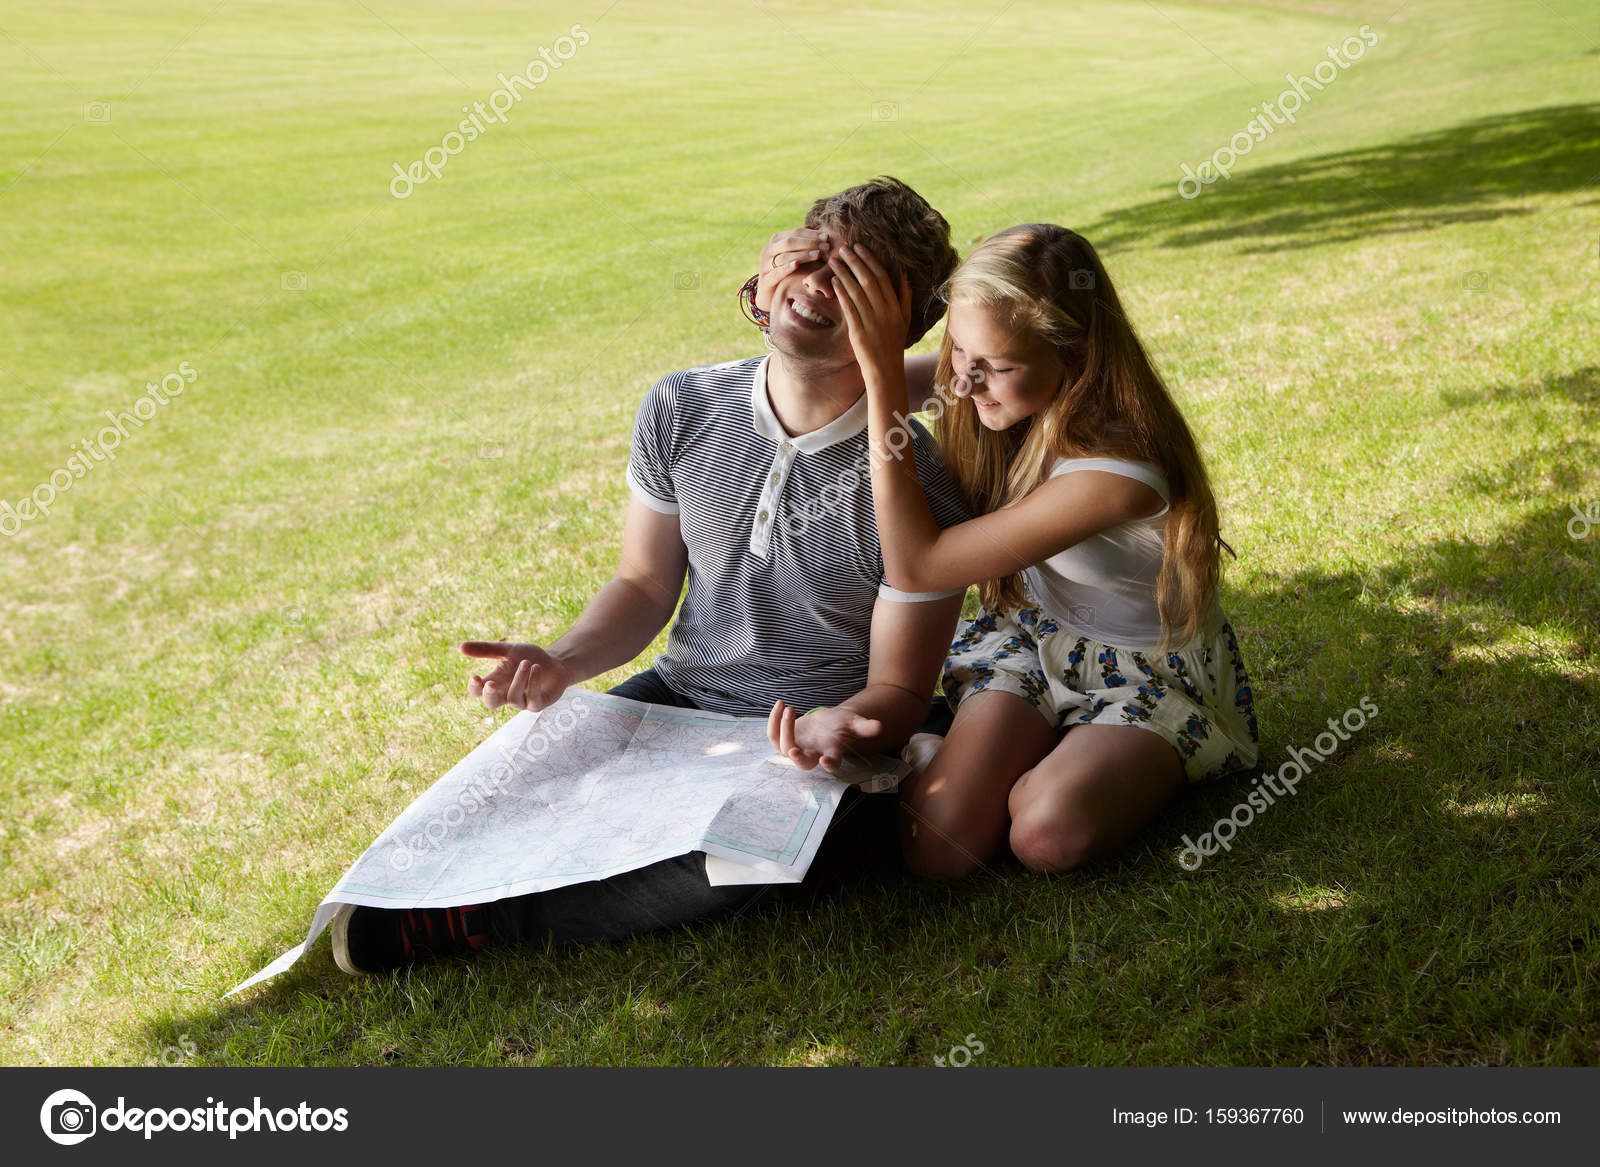 Girl Closing Boy Eyes With Hands Stock Photo C Imagesource